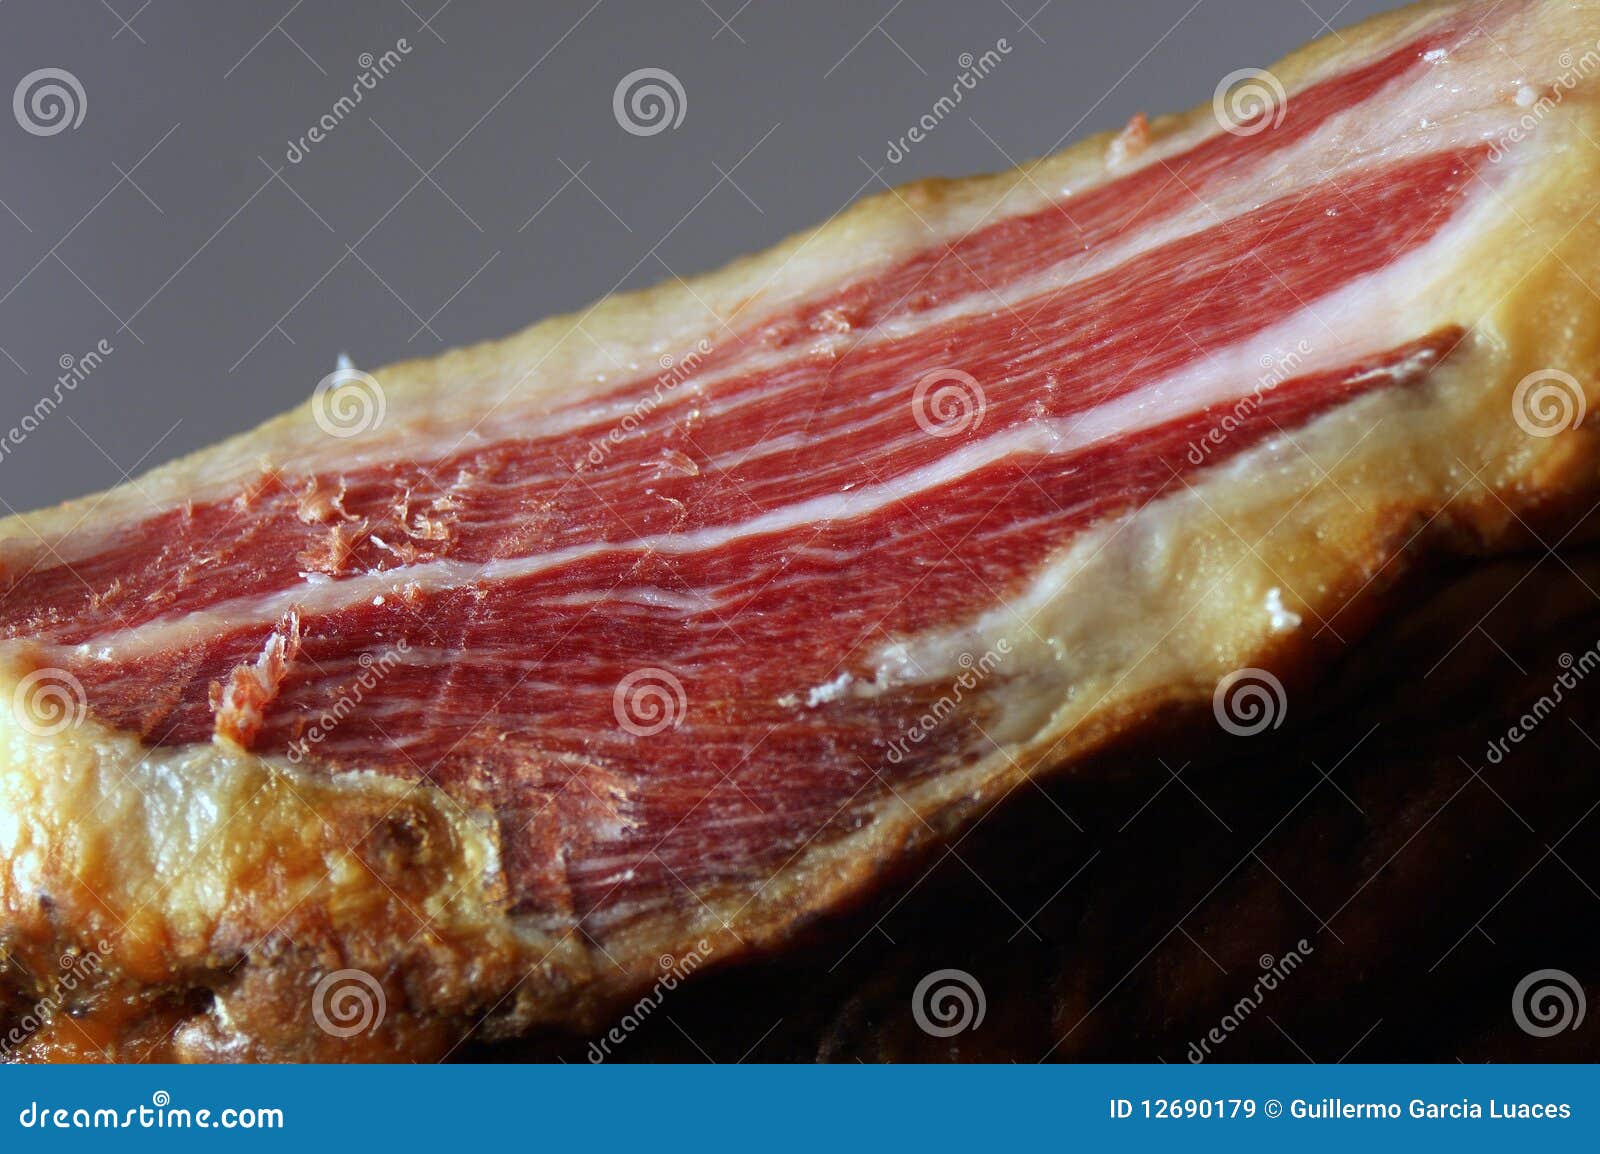 court of a typical jamon iberico ham from spain